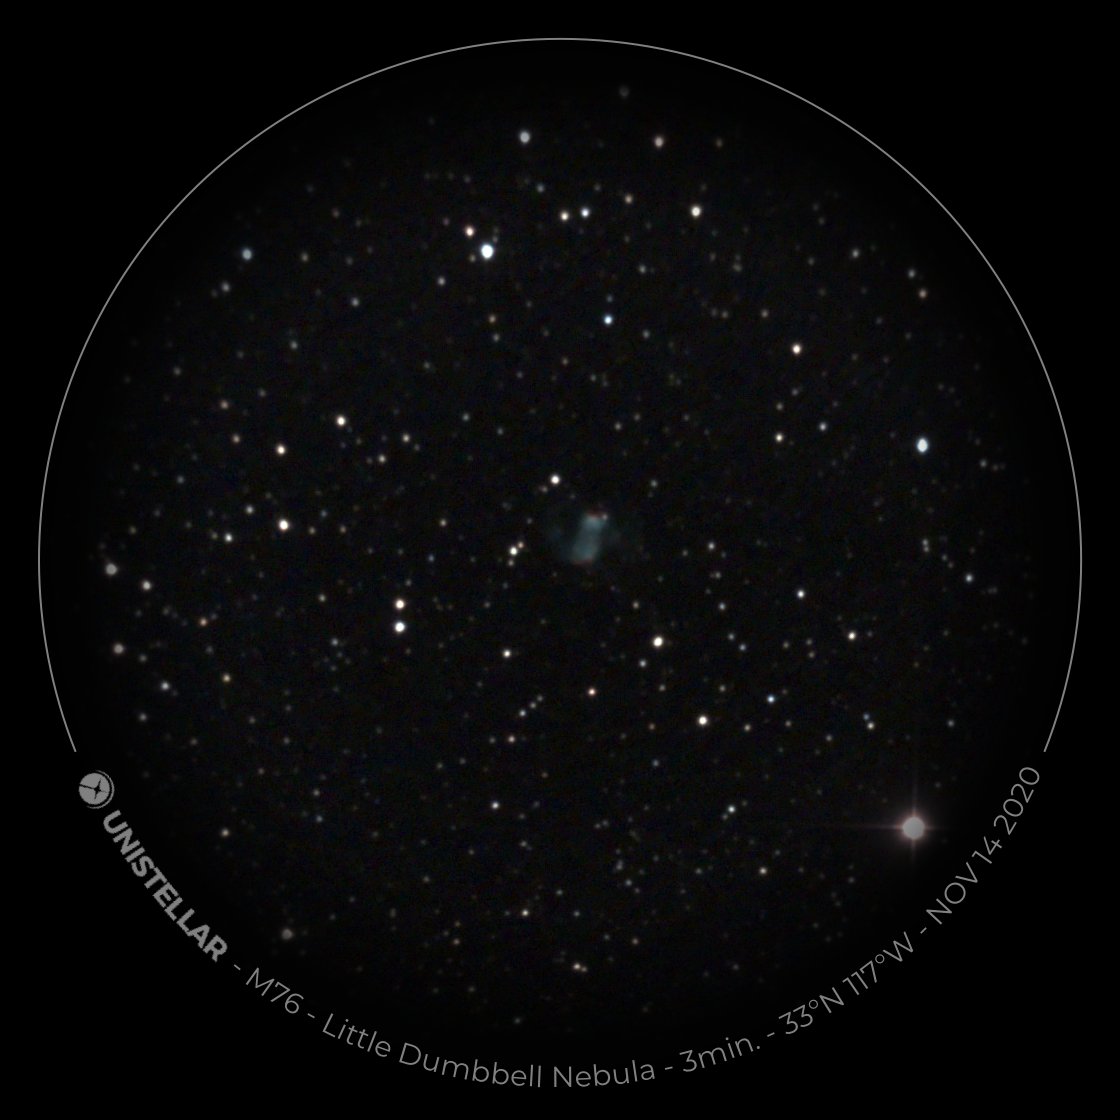 Once you turn on the telescope it quickly identifies where in the sky you are pointing and then it is very easy to choose a target from a list (or input your own coordinates) of objects in the sky. My first target was planetary nebula M76.